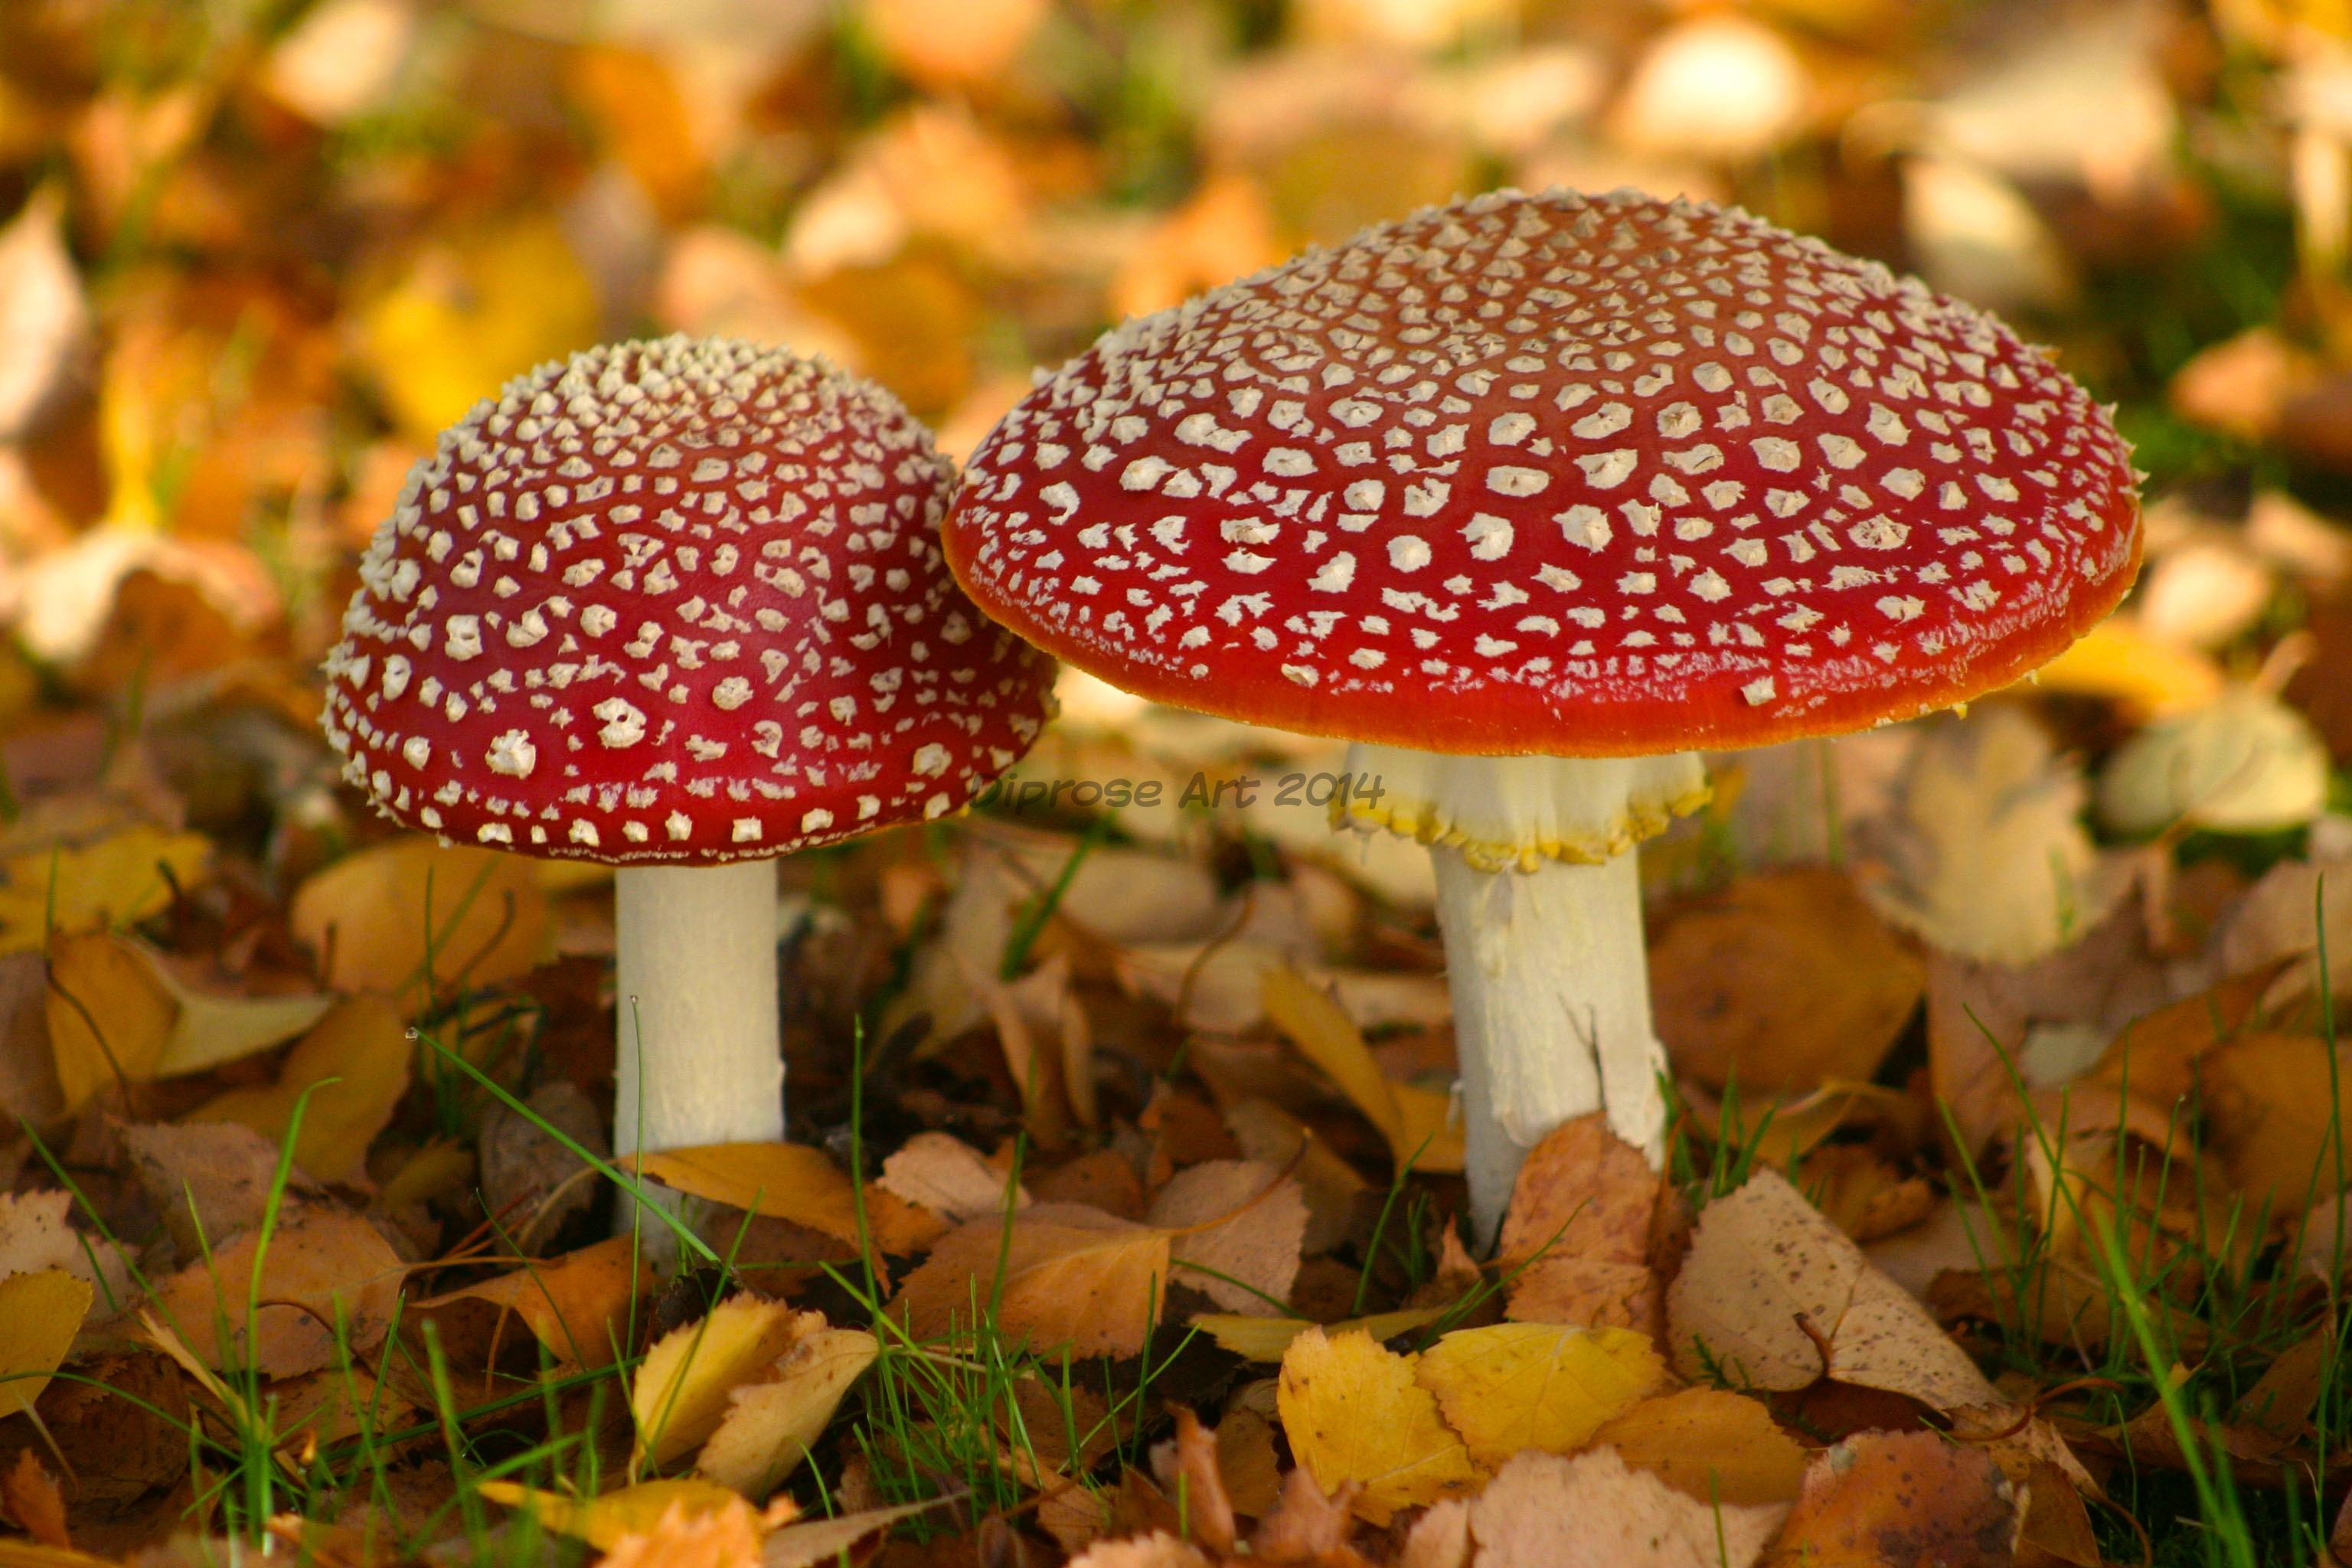 I find fungi fascinating - and Fly Agaric are my favourites - proper fairy toadstools